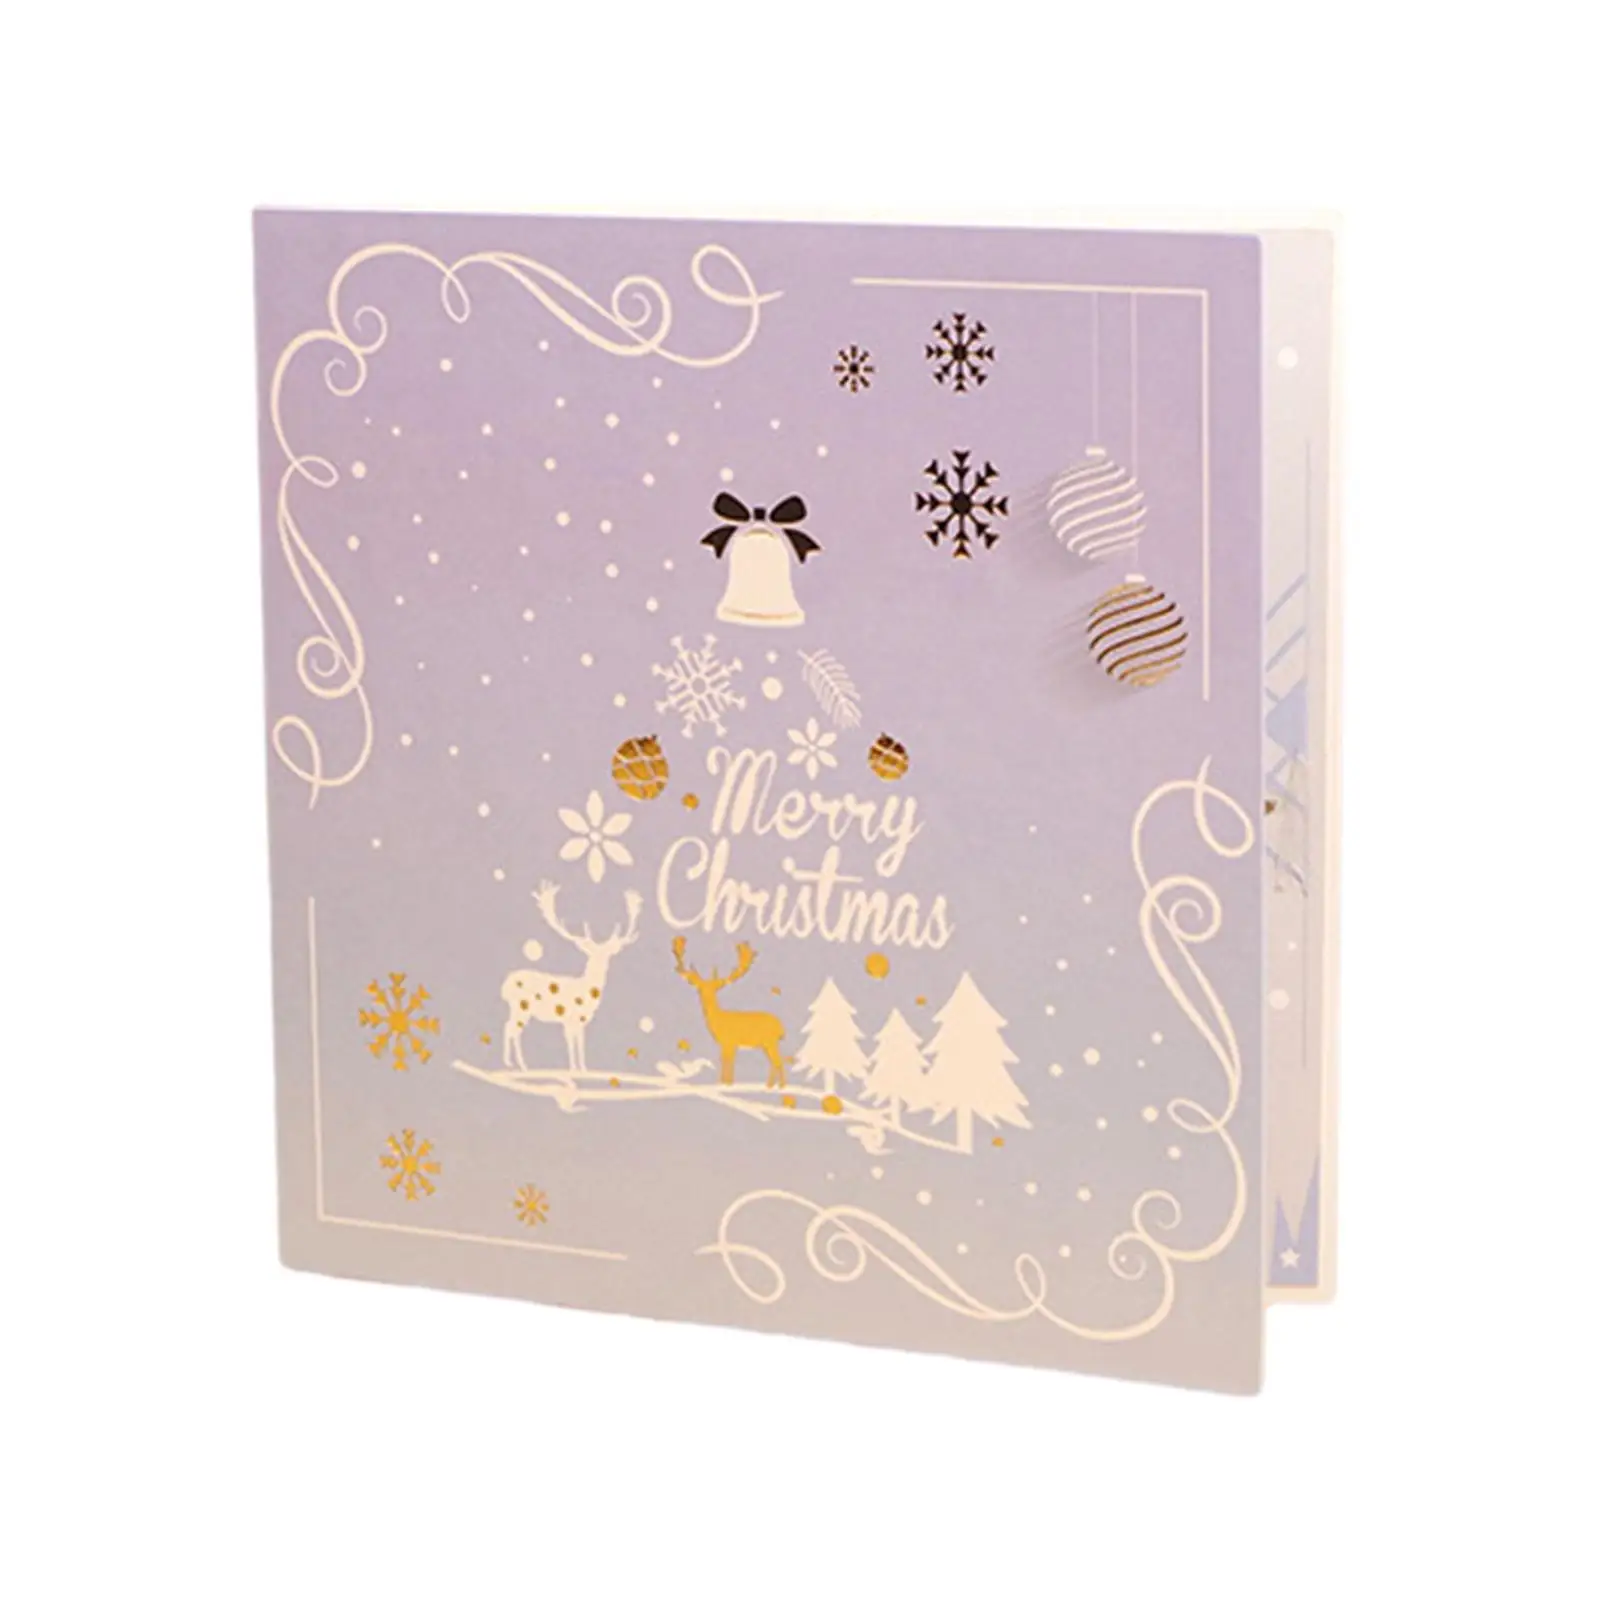 Xmas Greeting Card Popup Christmas Greeting Card for Friend New Year Mum